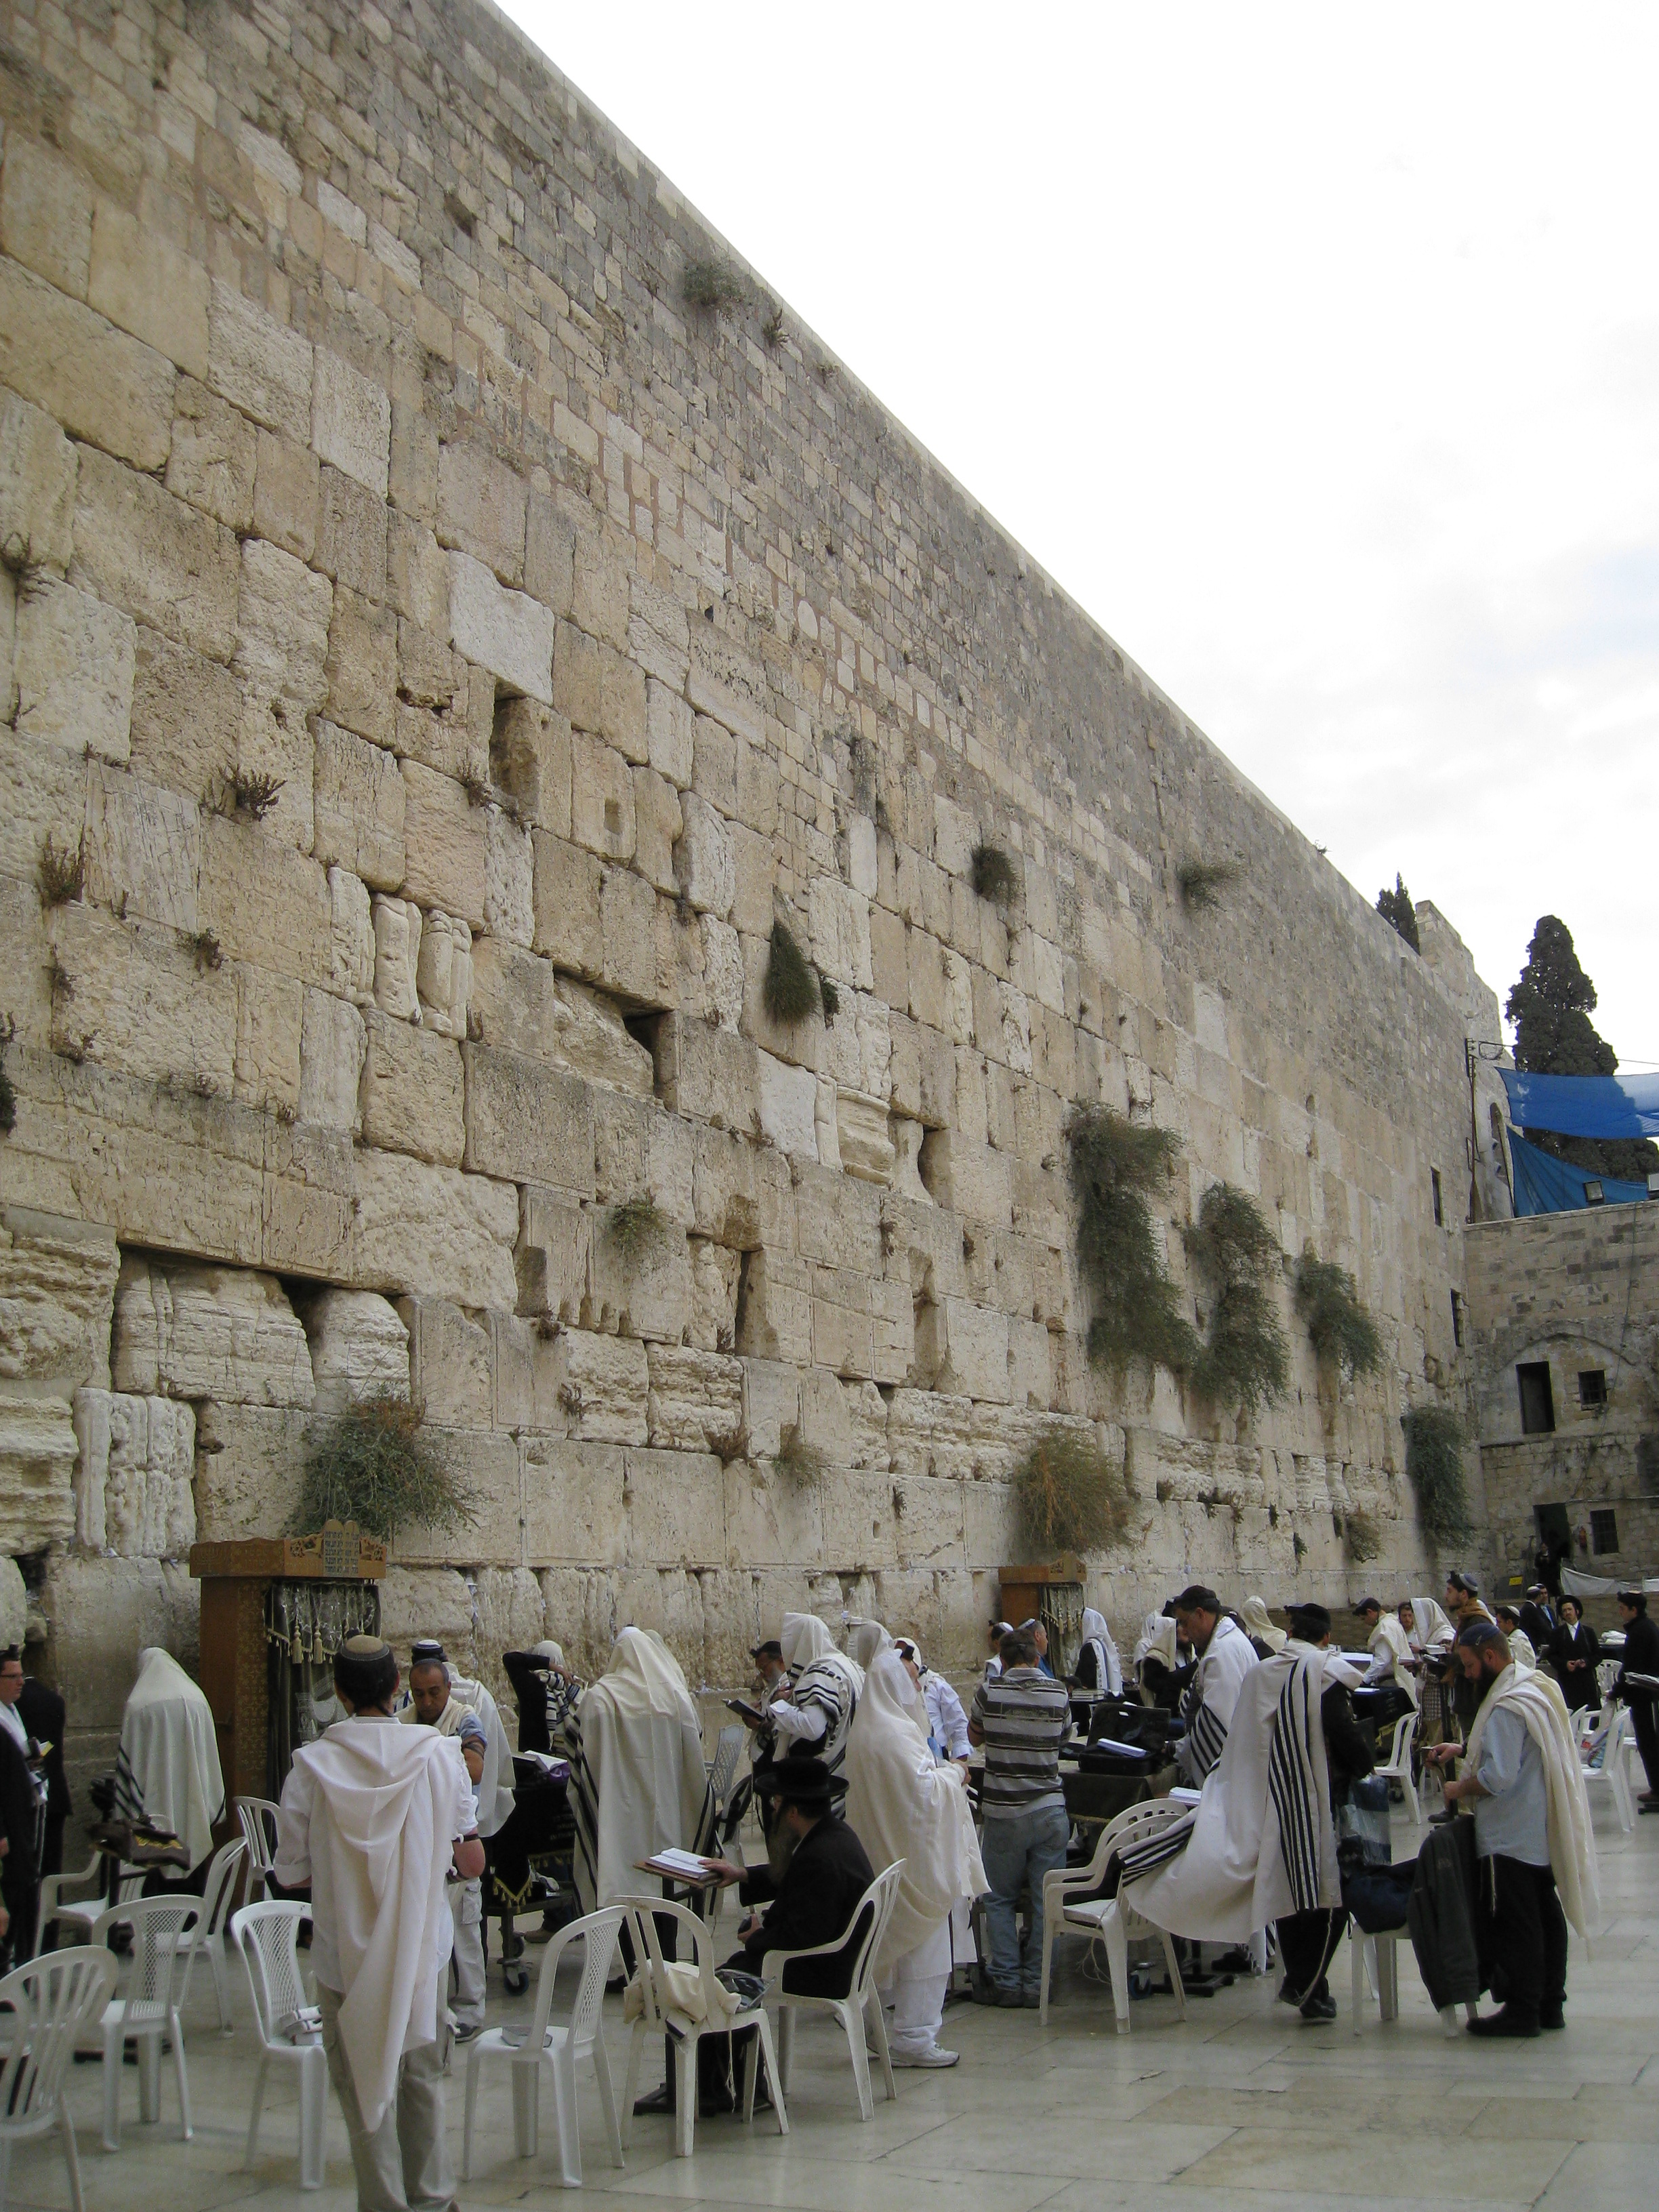 Mesmerizing photos of the Western Wall or 'Wailing Wall' in Israel ...